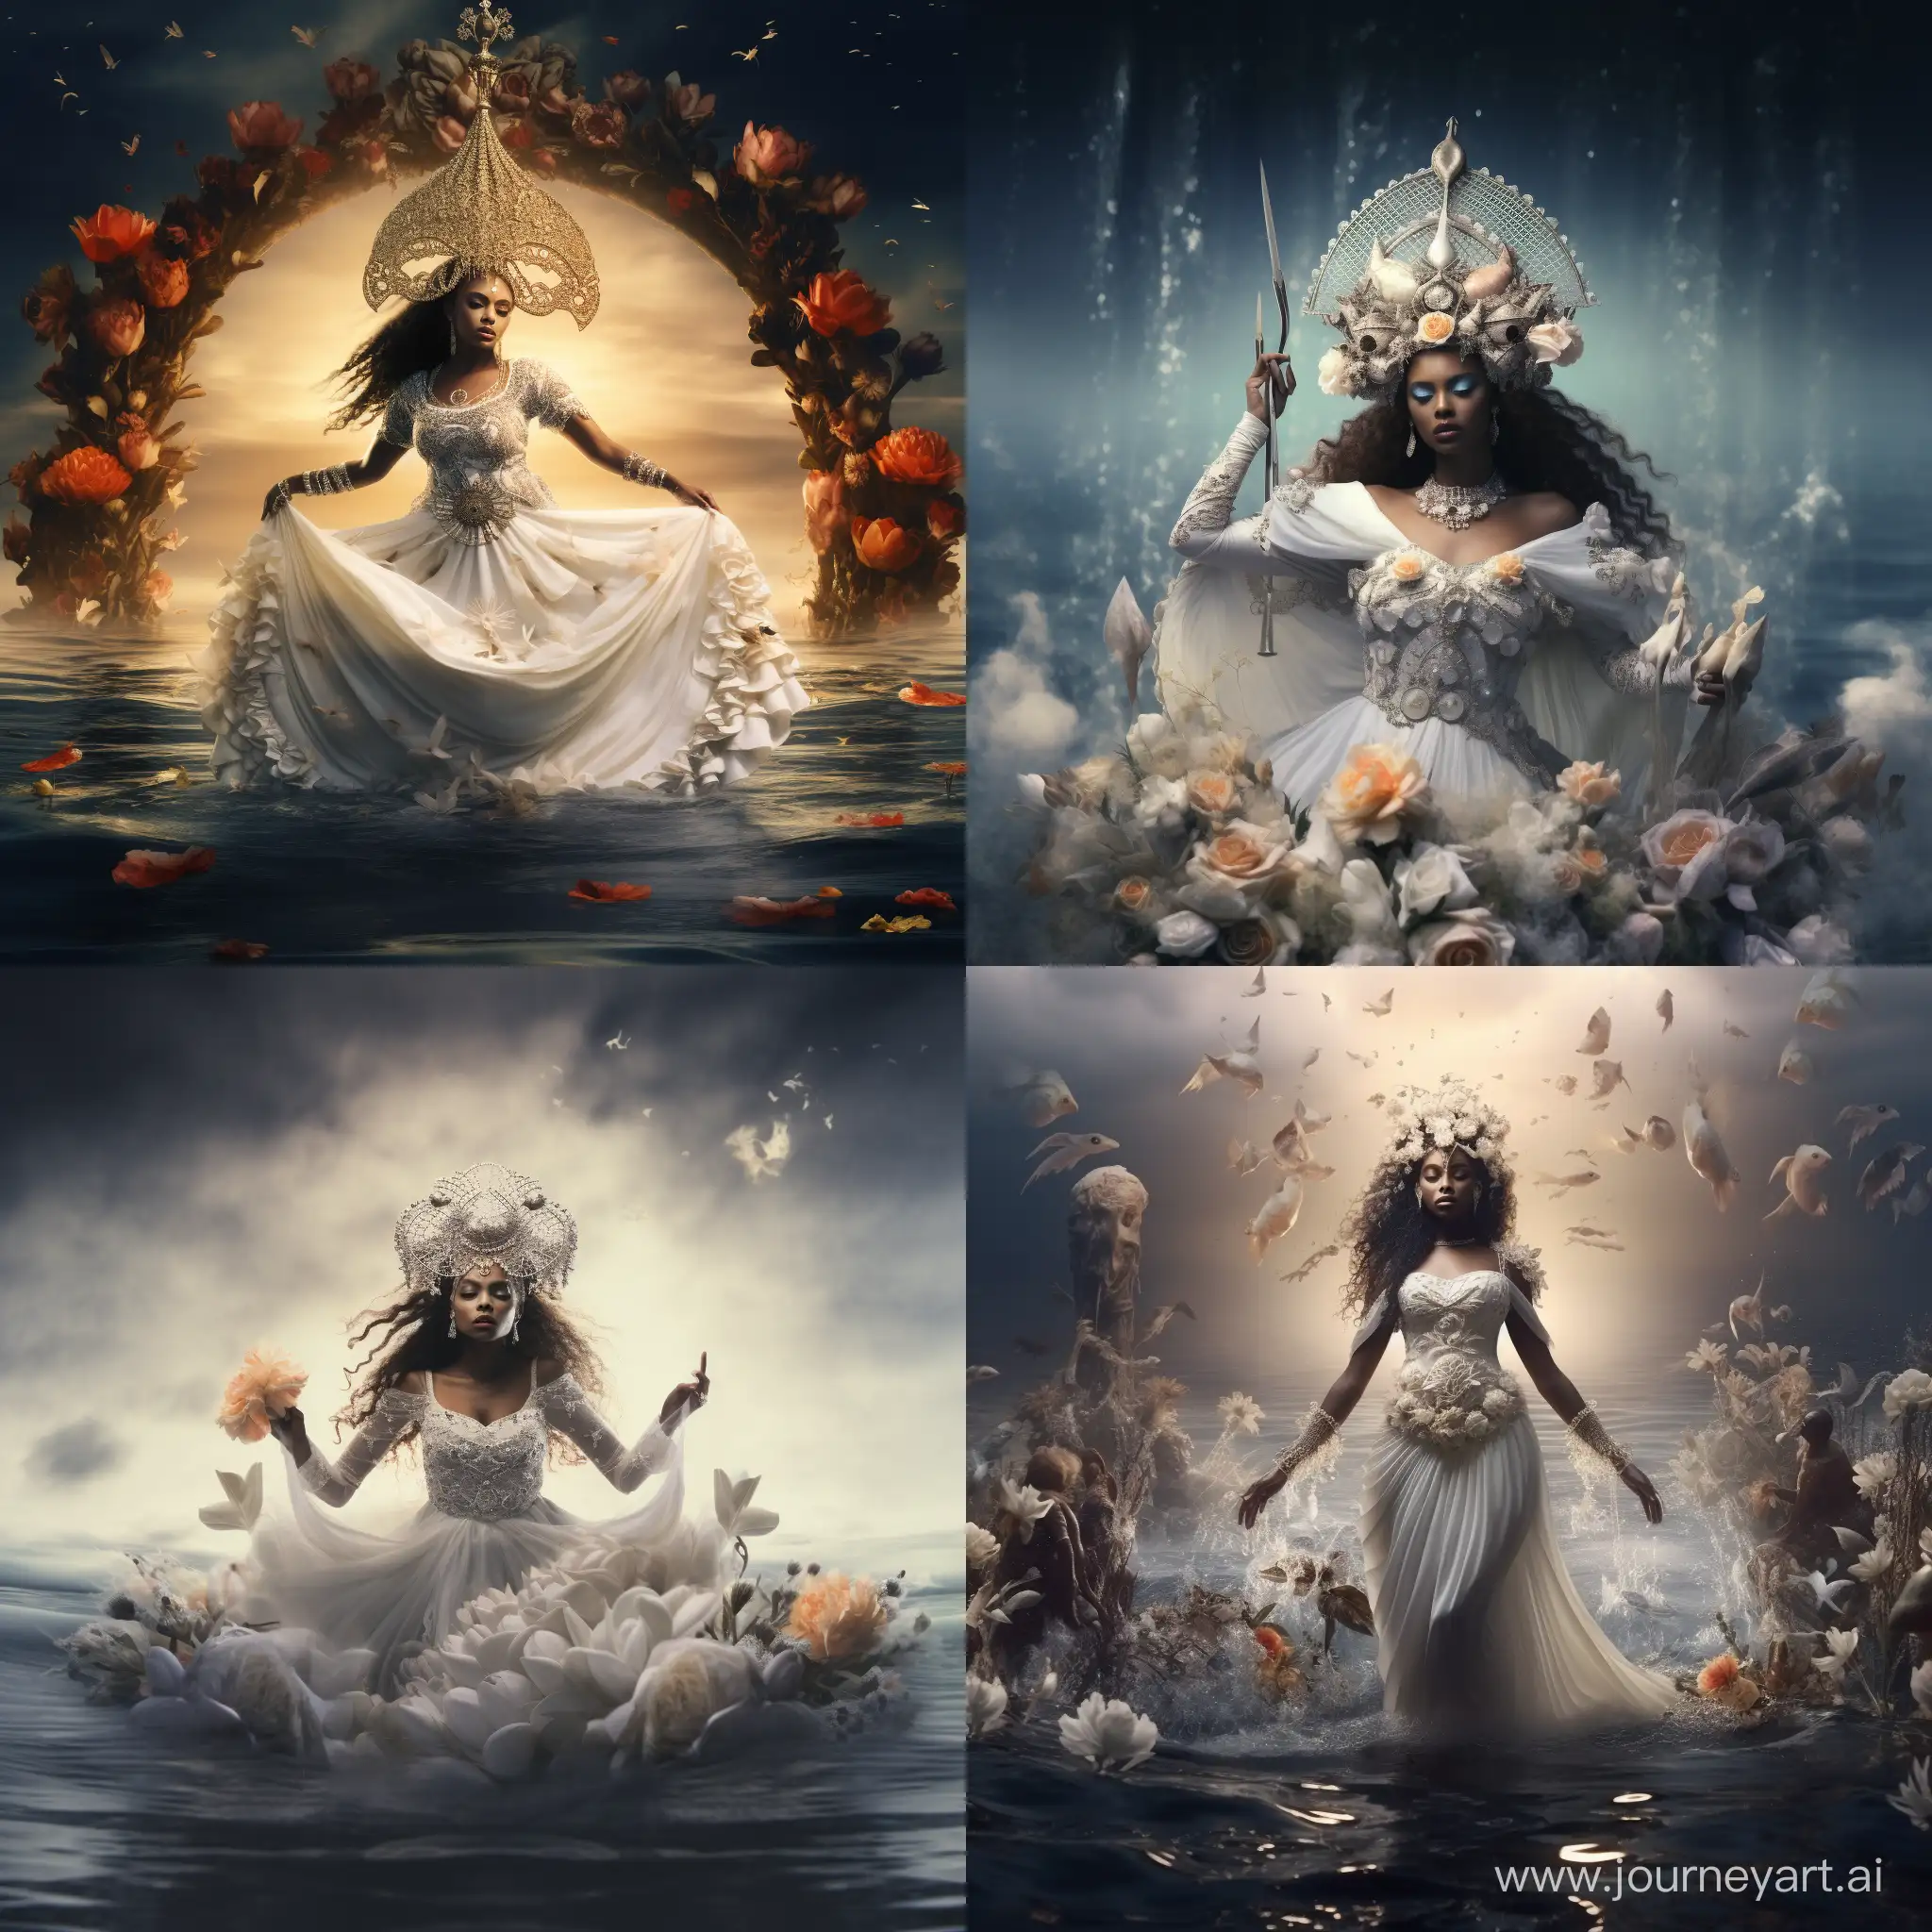 Enchanting-DarkSkinned-Bride-Emerges-in-the-Mystical-Boiling-Sea